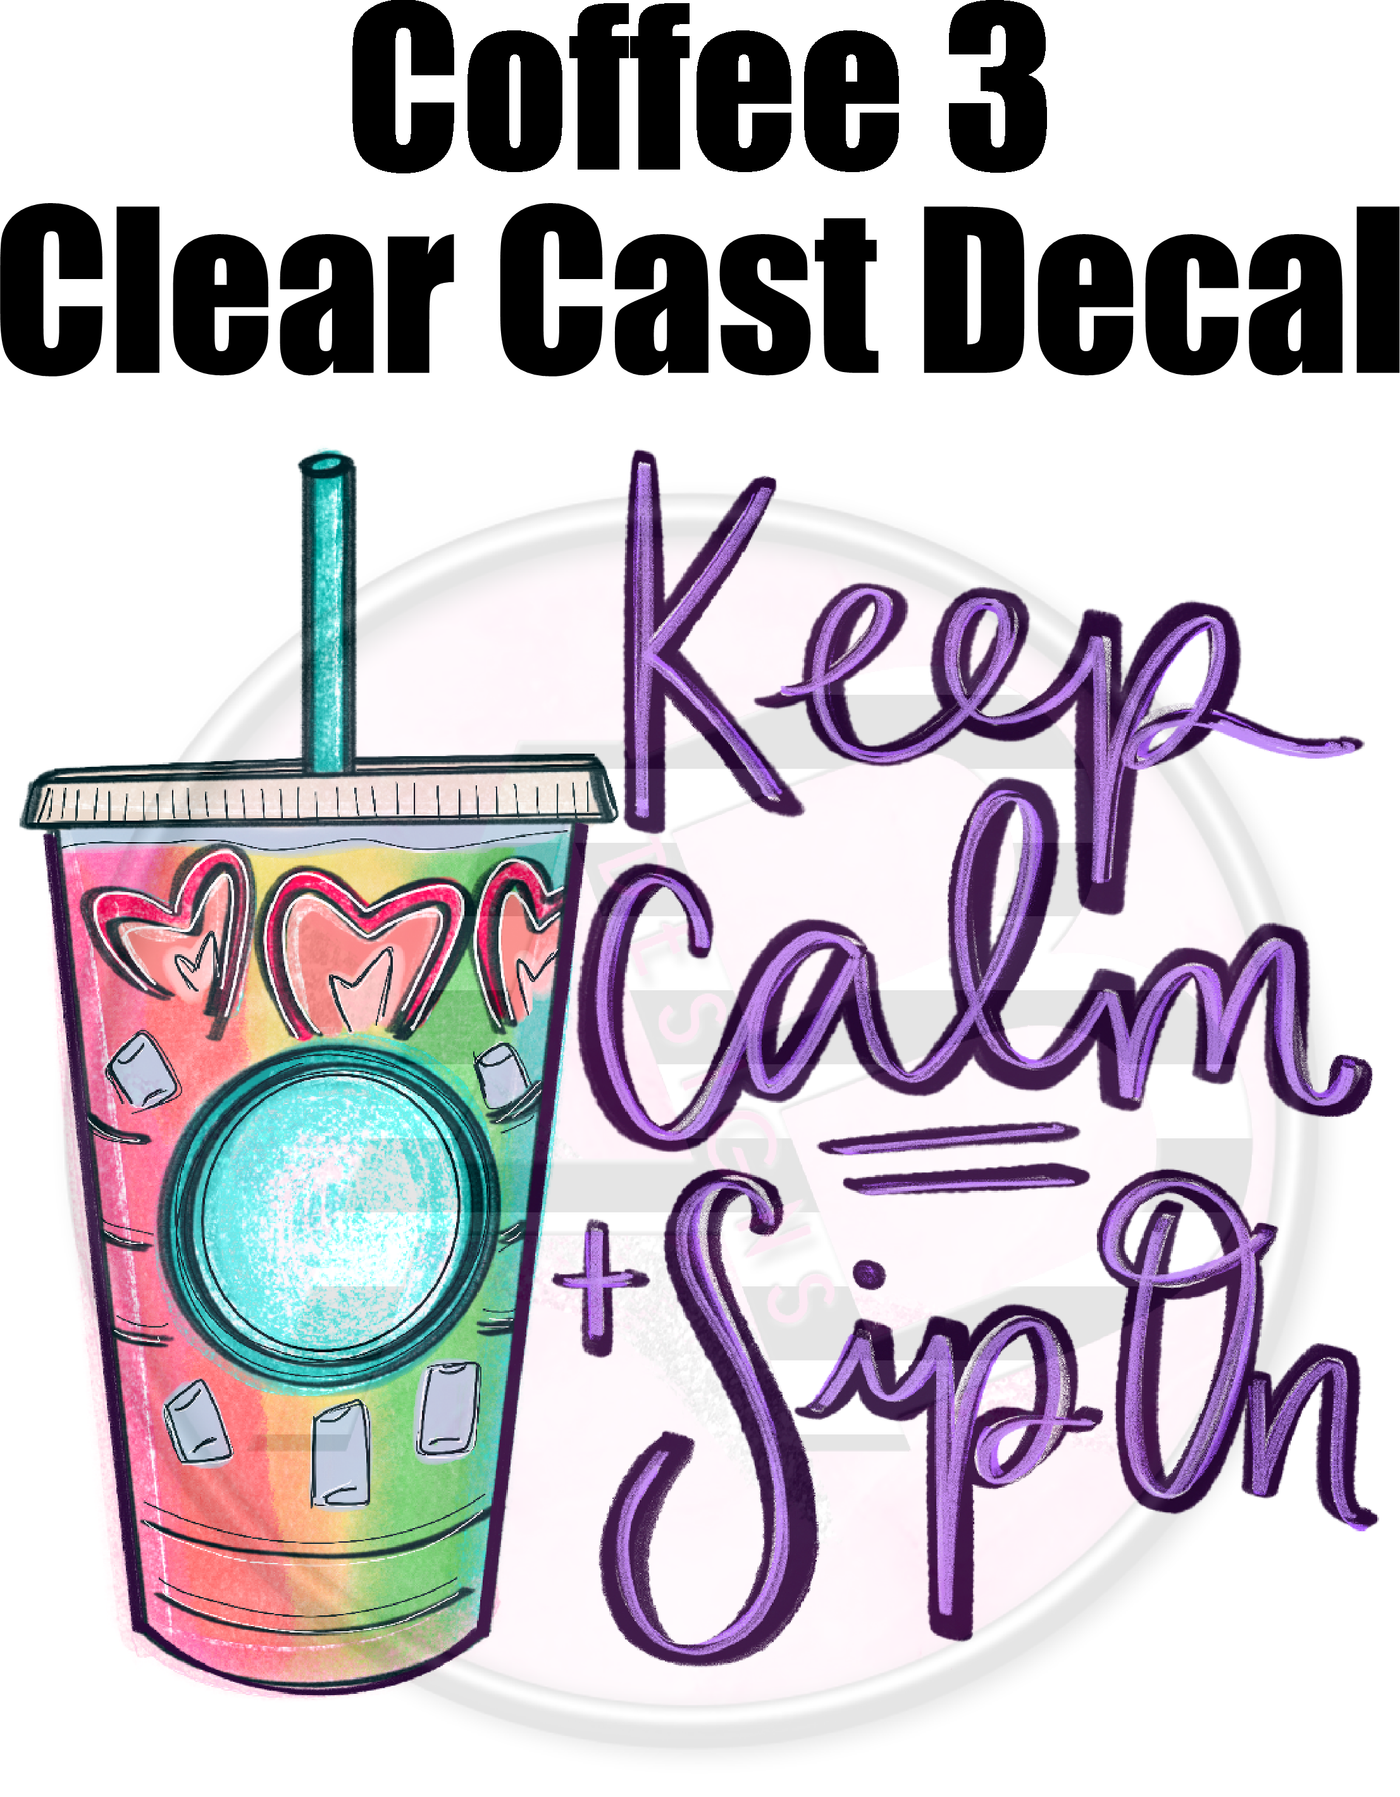 Coffee 3 - Clear Cast Decal